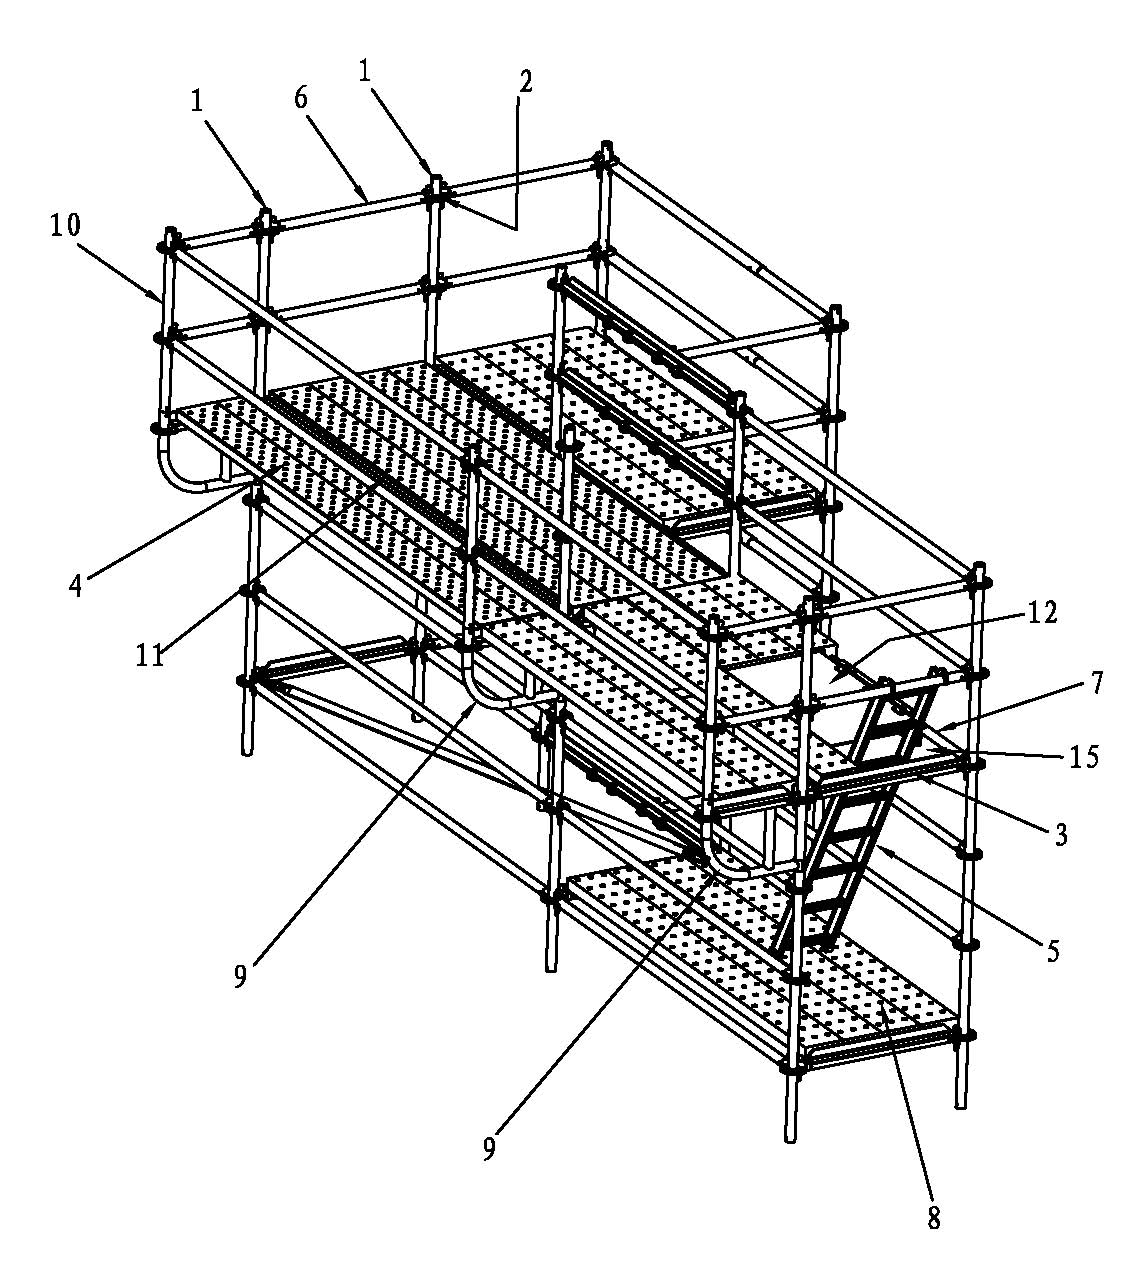 Scaffold with expanded working platform